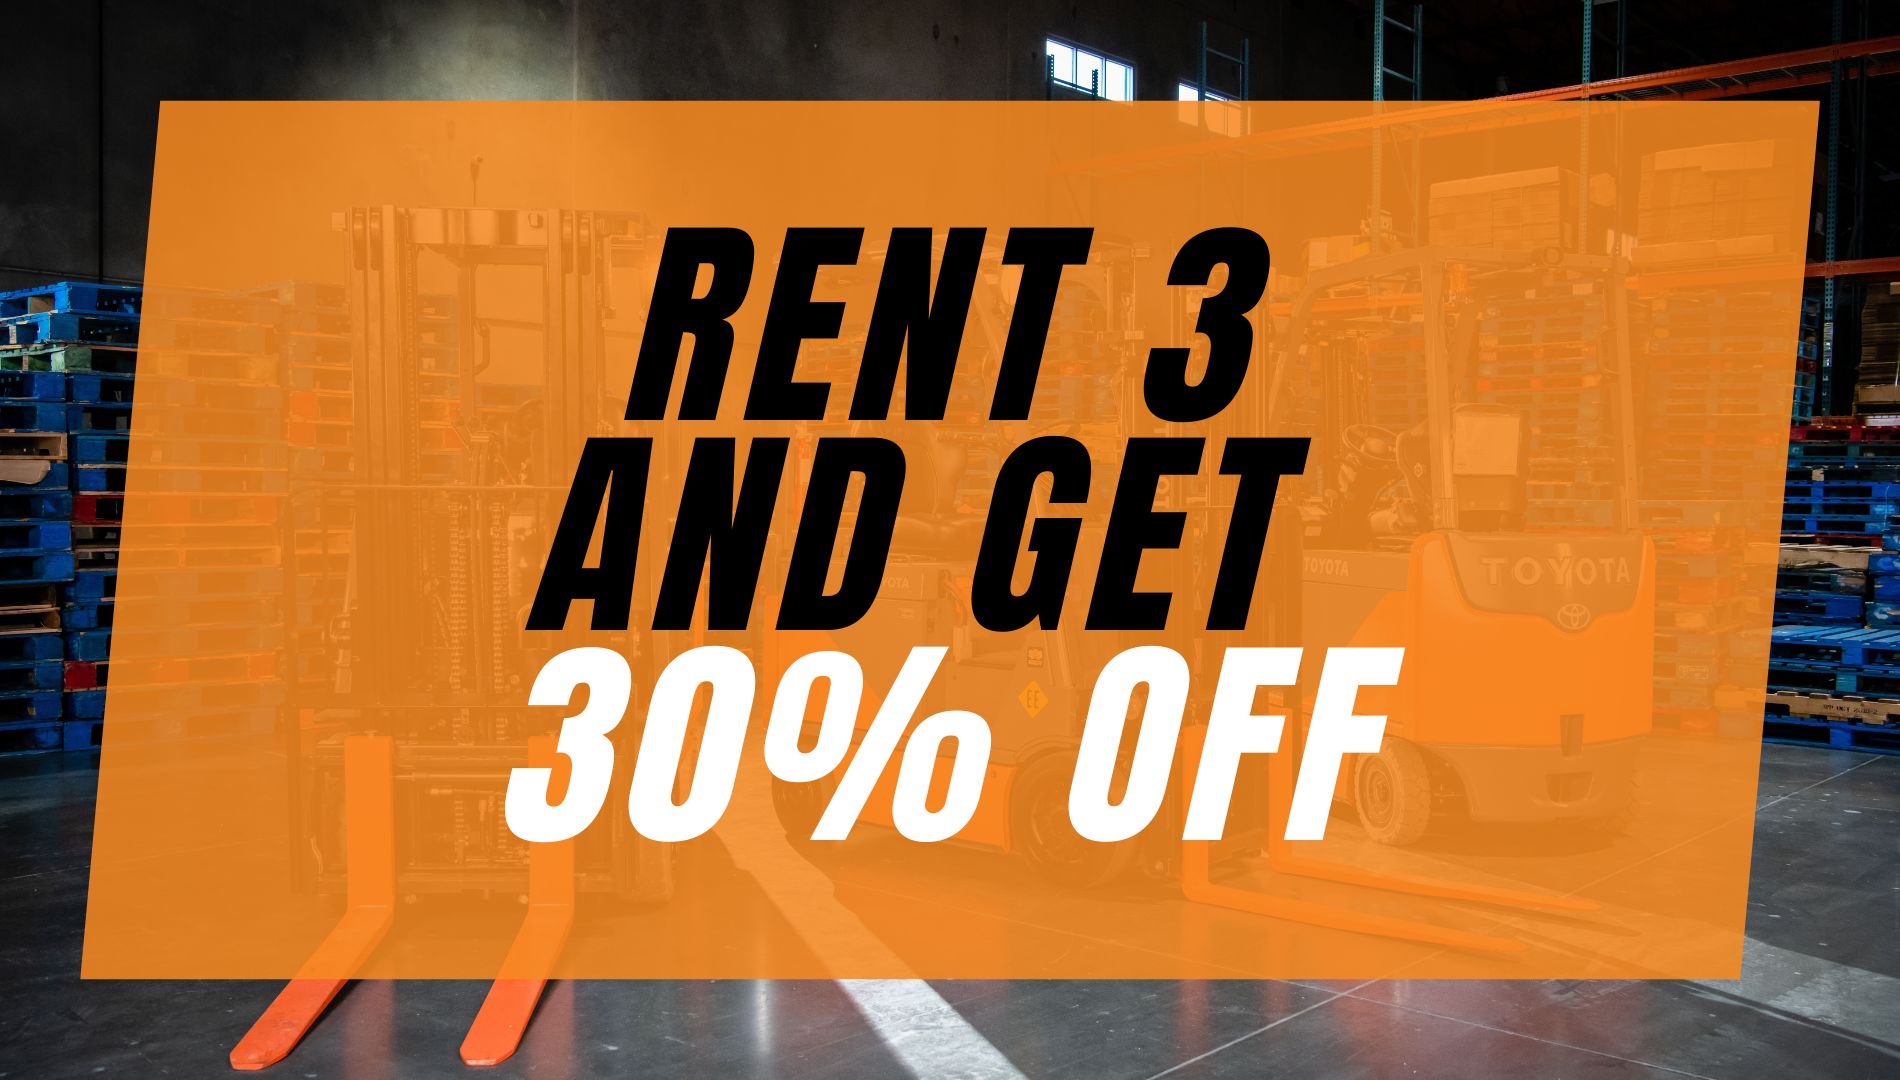 Blog post - Rent 3 and get 30% OFF